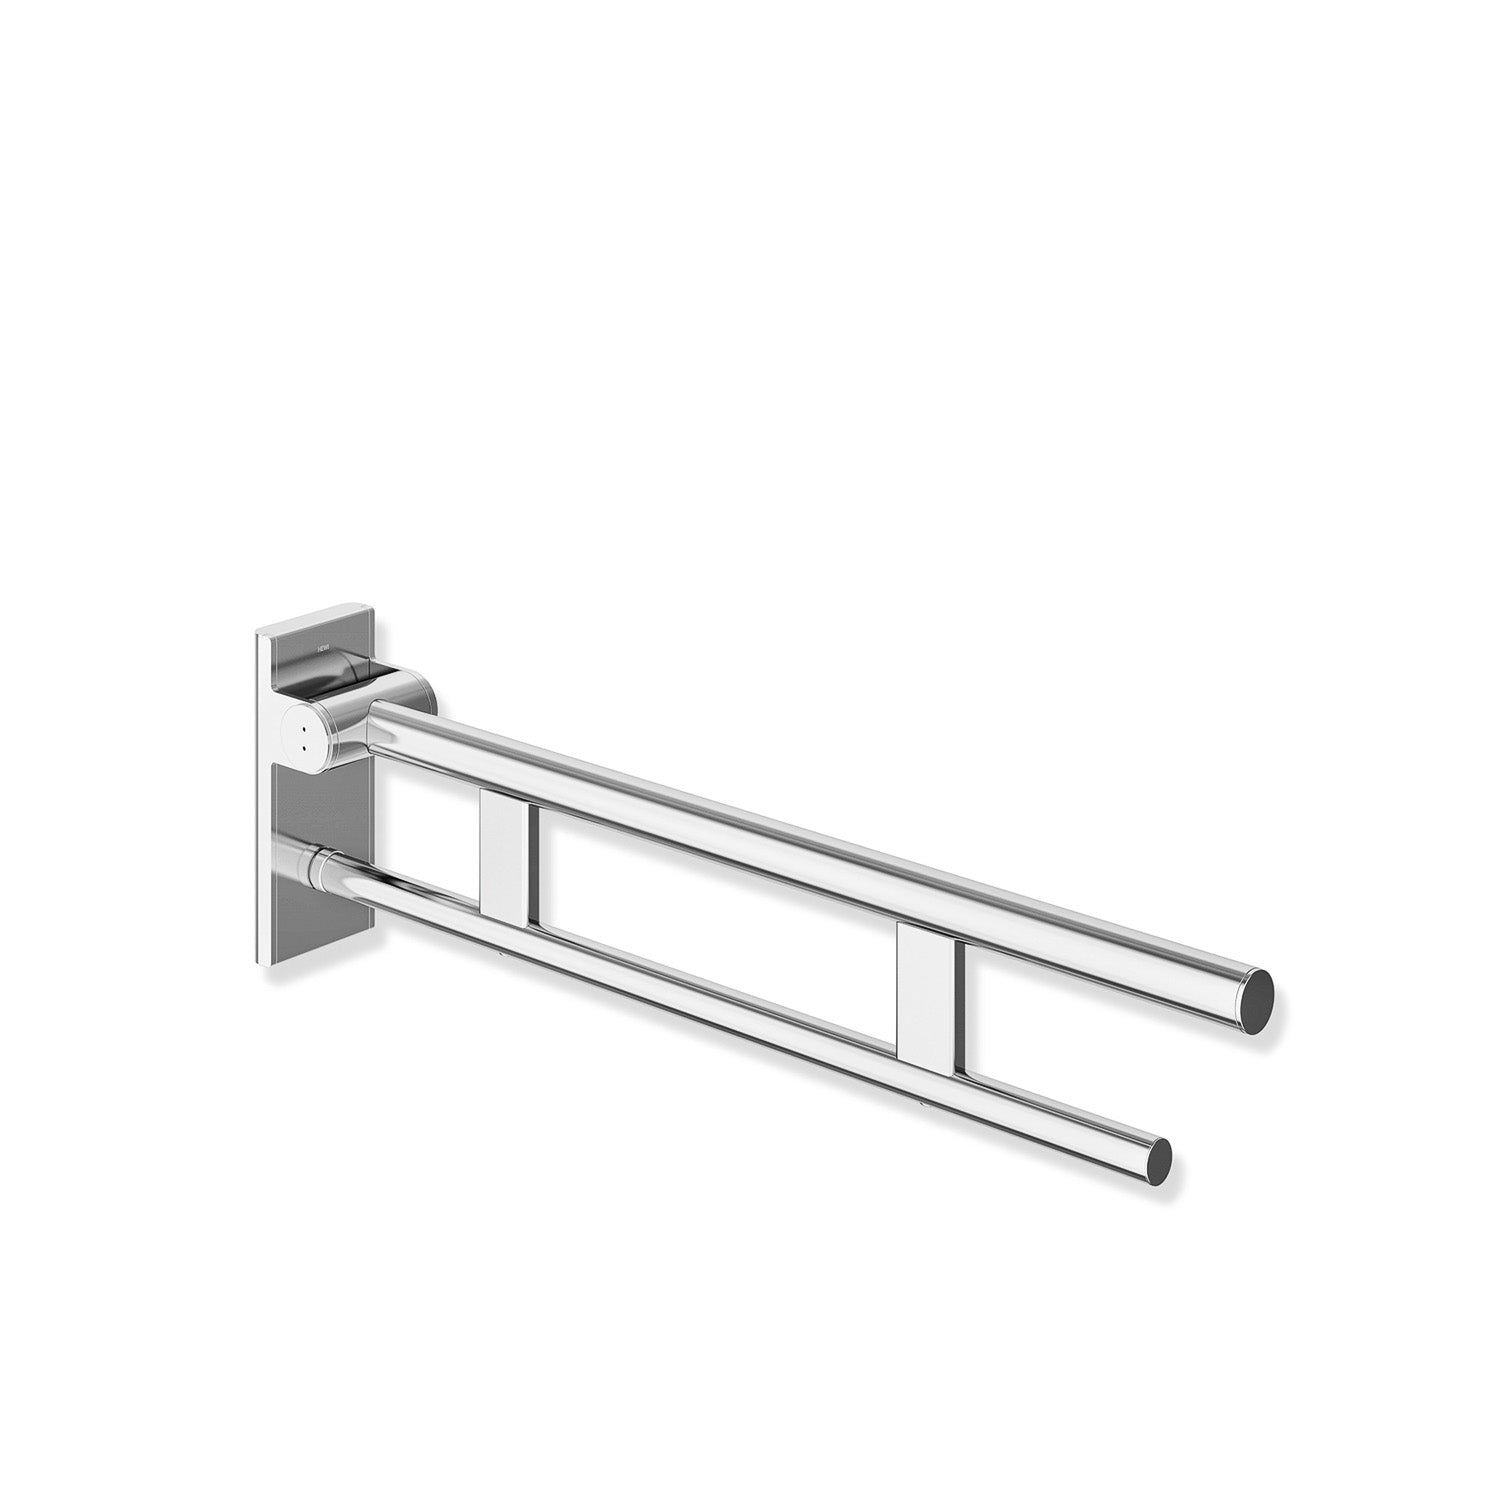 850mm Freestyle Hinged Grab Rail with a chrome finish on a white background